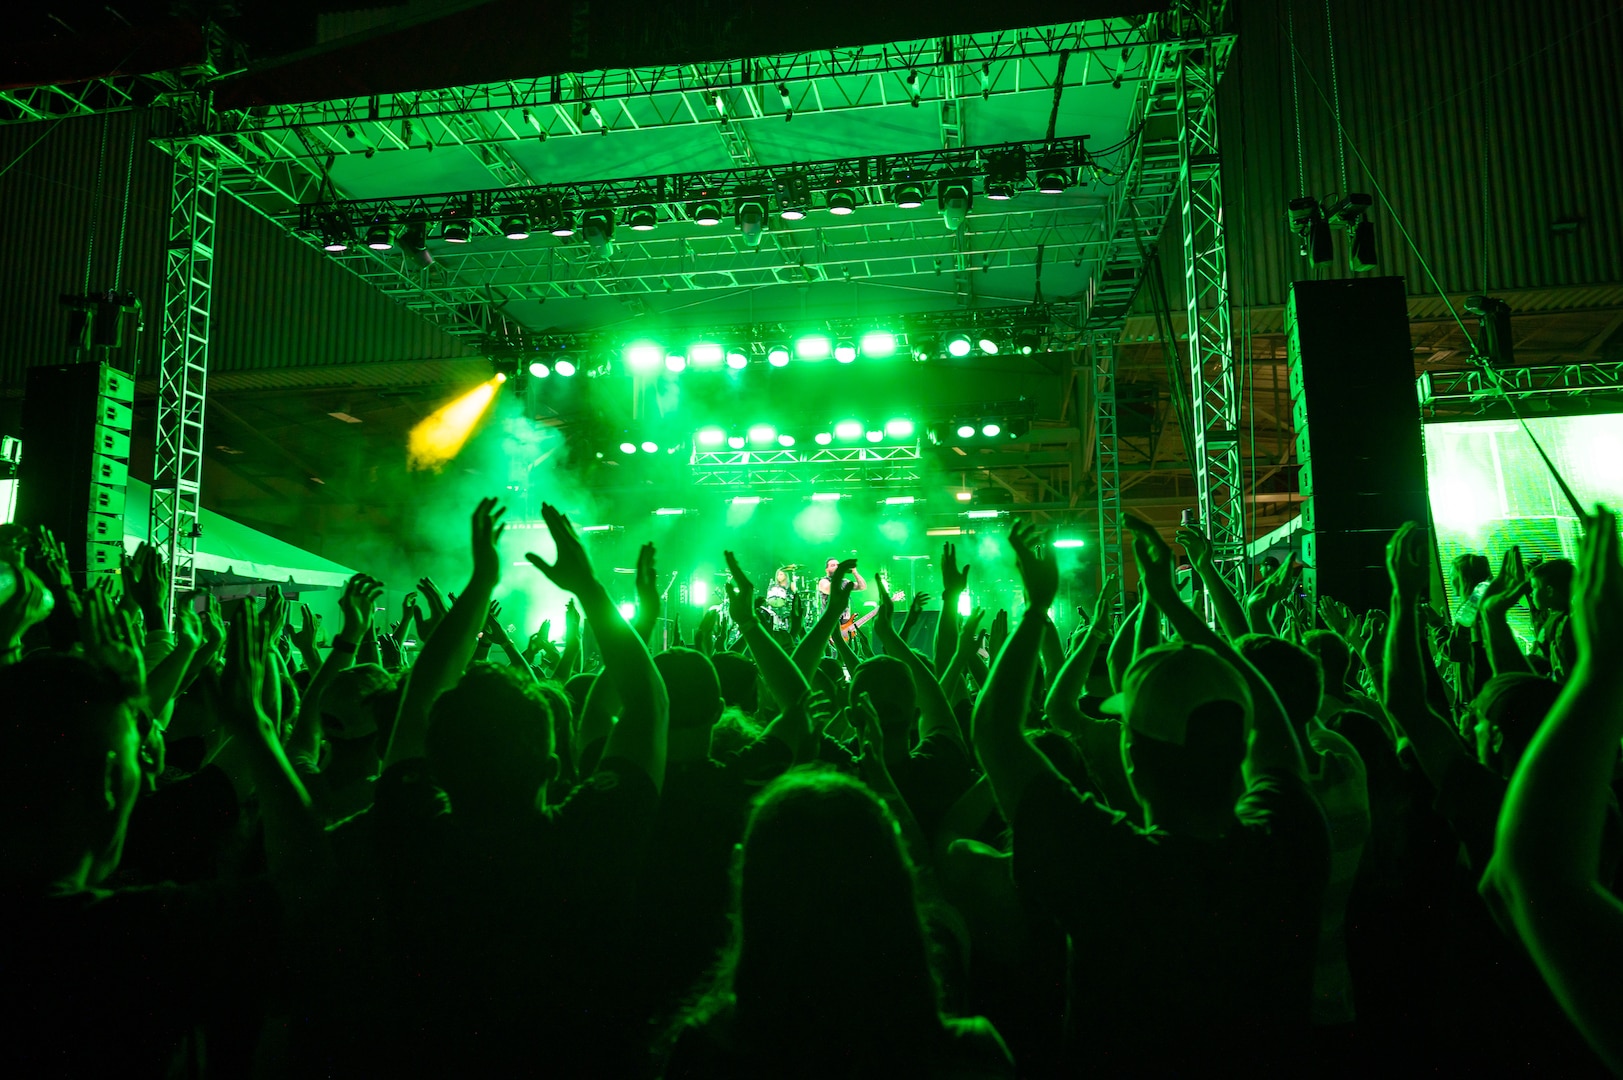 Audience members dance to a song played by the rock band Skillet